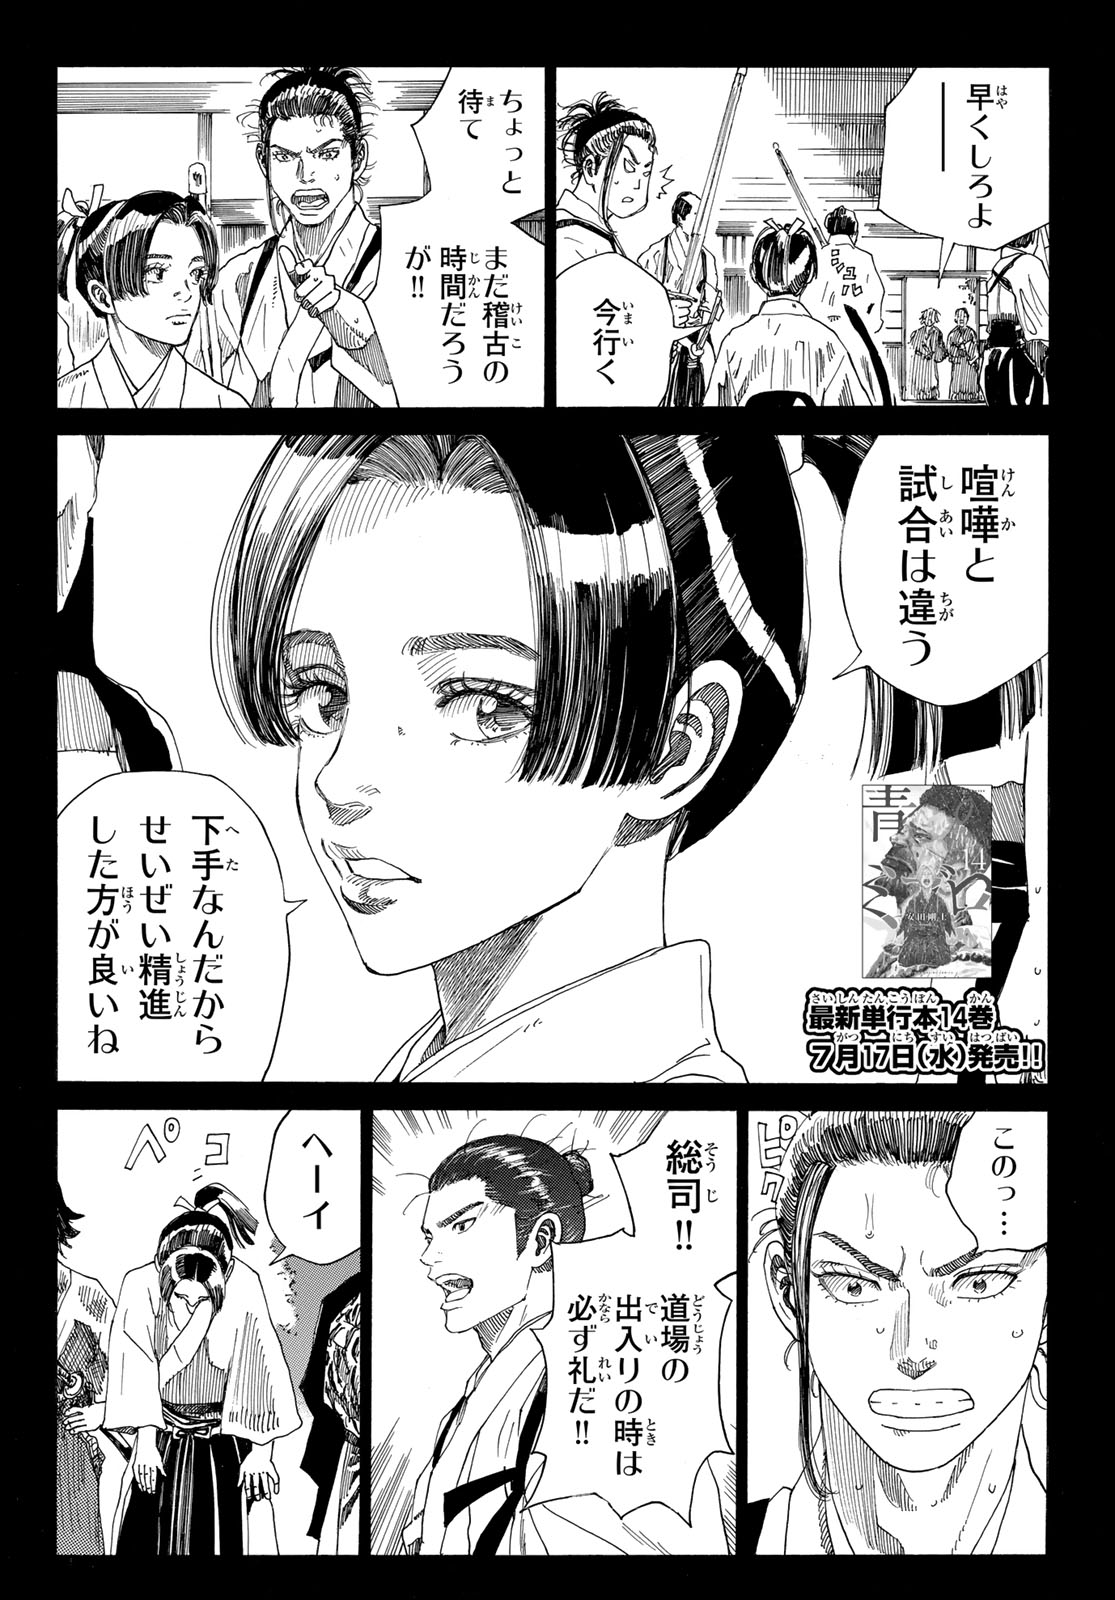 An Mo Miburo 第132話 - Page 2